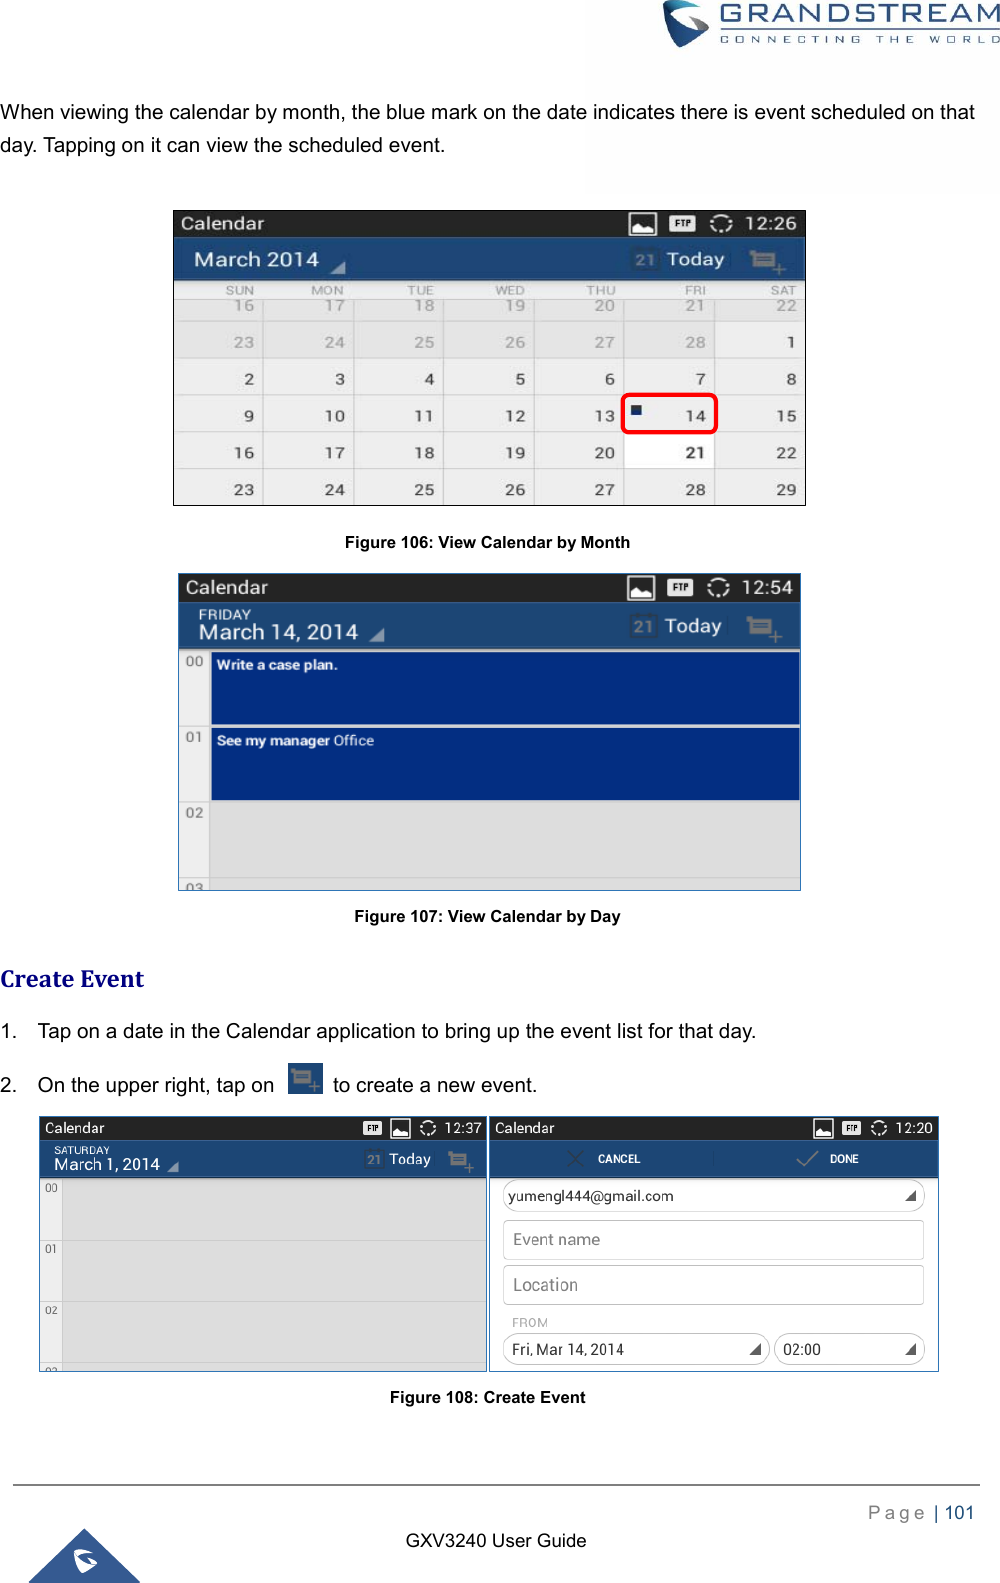    P a g e  | 101    GXV3240 User Guide  When viewing the calendar by month, the blue mark on the date indicates there is event scheduled on that day. Tapping on it can view the scheduled event.   Figure 106: View Calendar by Month  Figure 107: View Calendar by Day Create Event 1.  Tap on a date in the Calendar application to bring up the event list for that day.   2.  On the upper right, tap on    to create a new event.  Figure 108: Create Event 